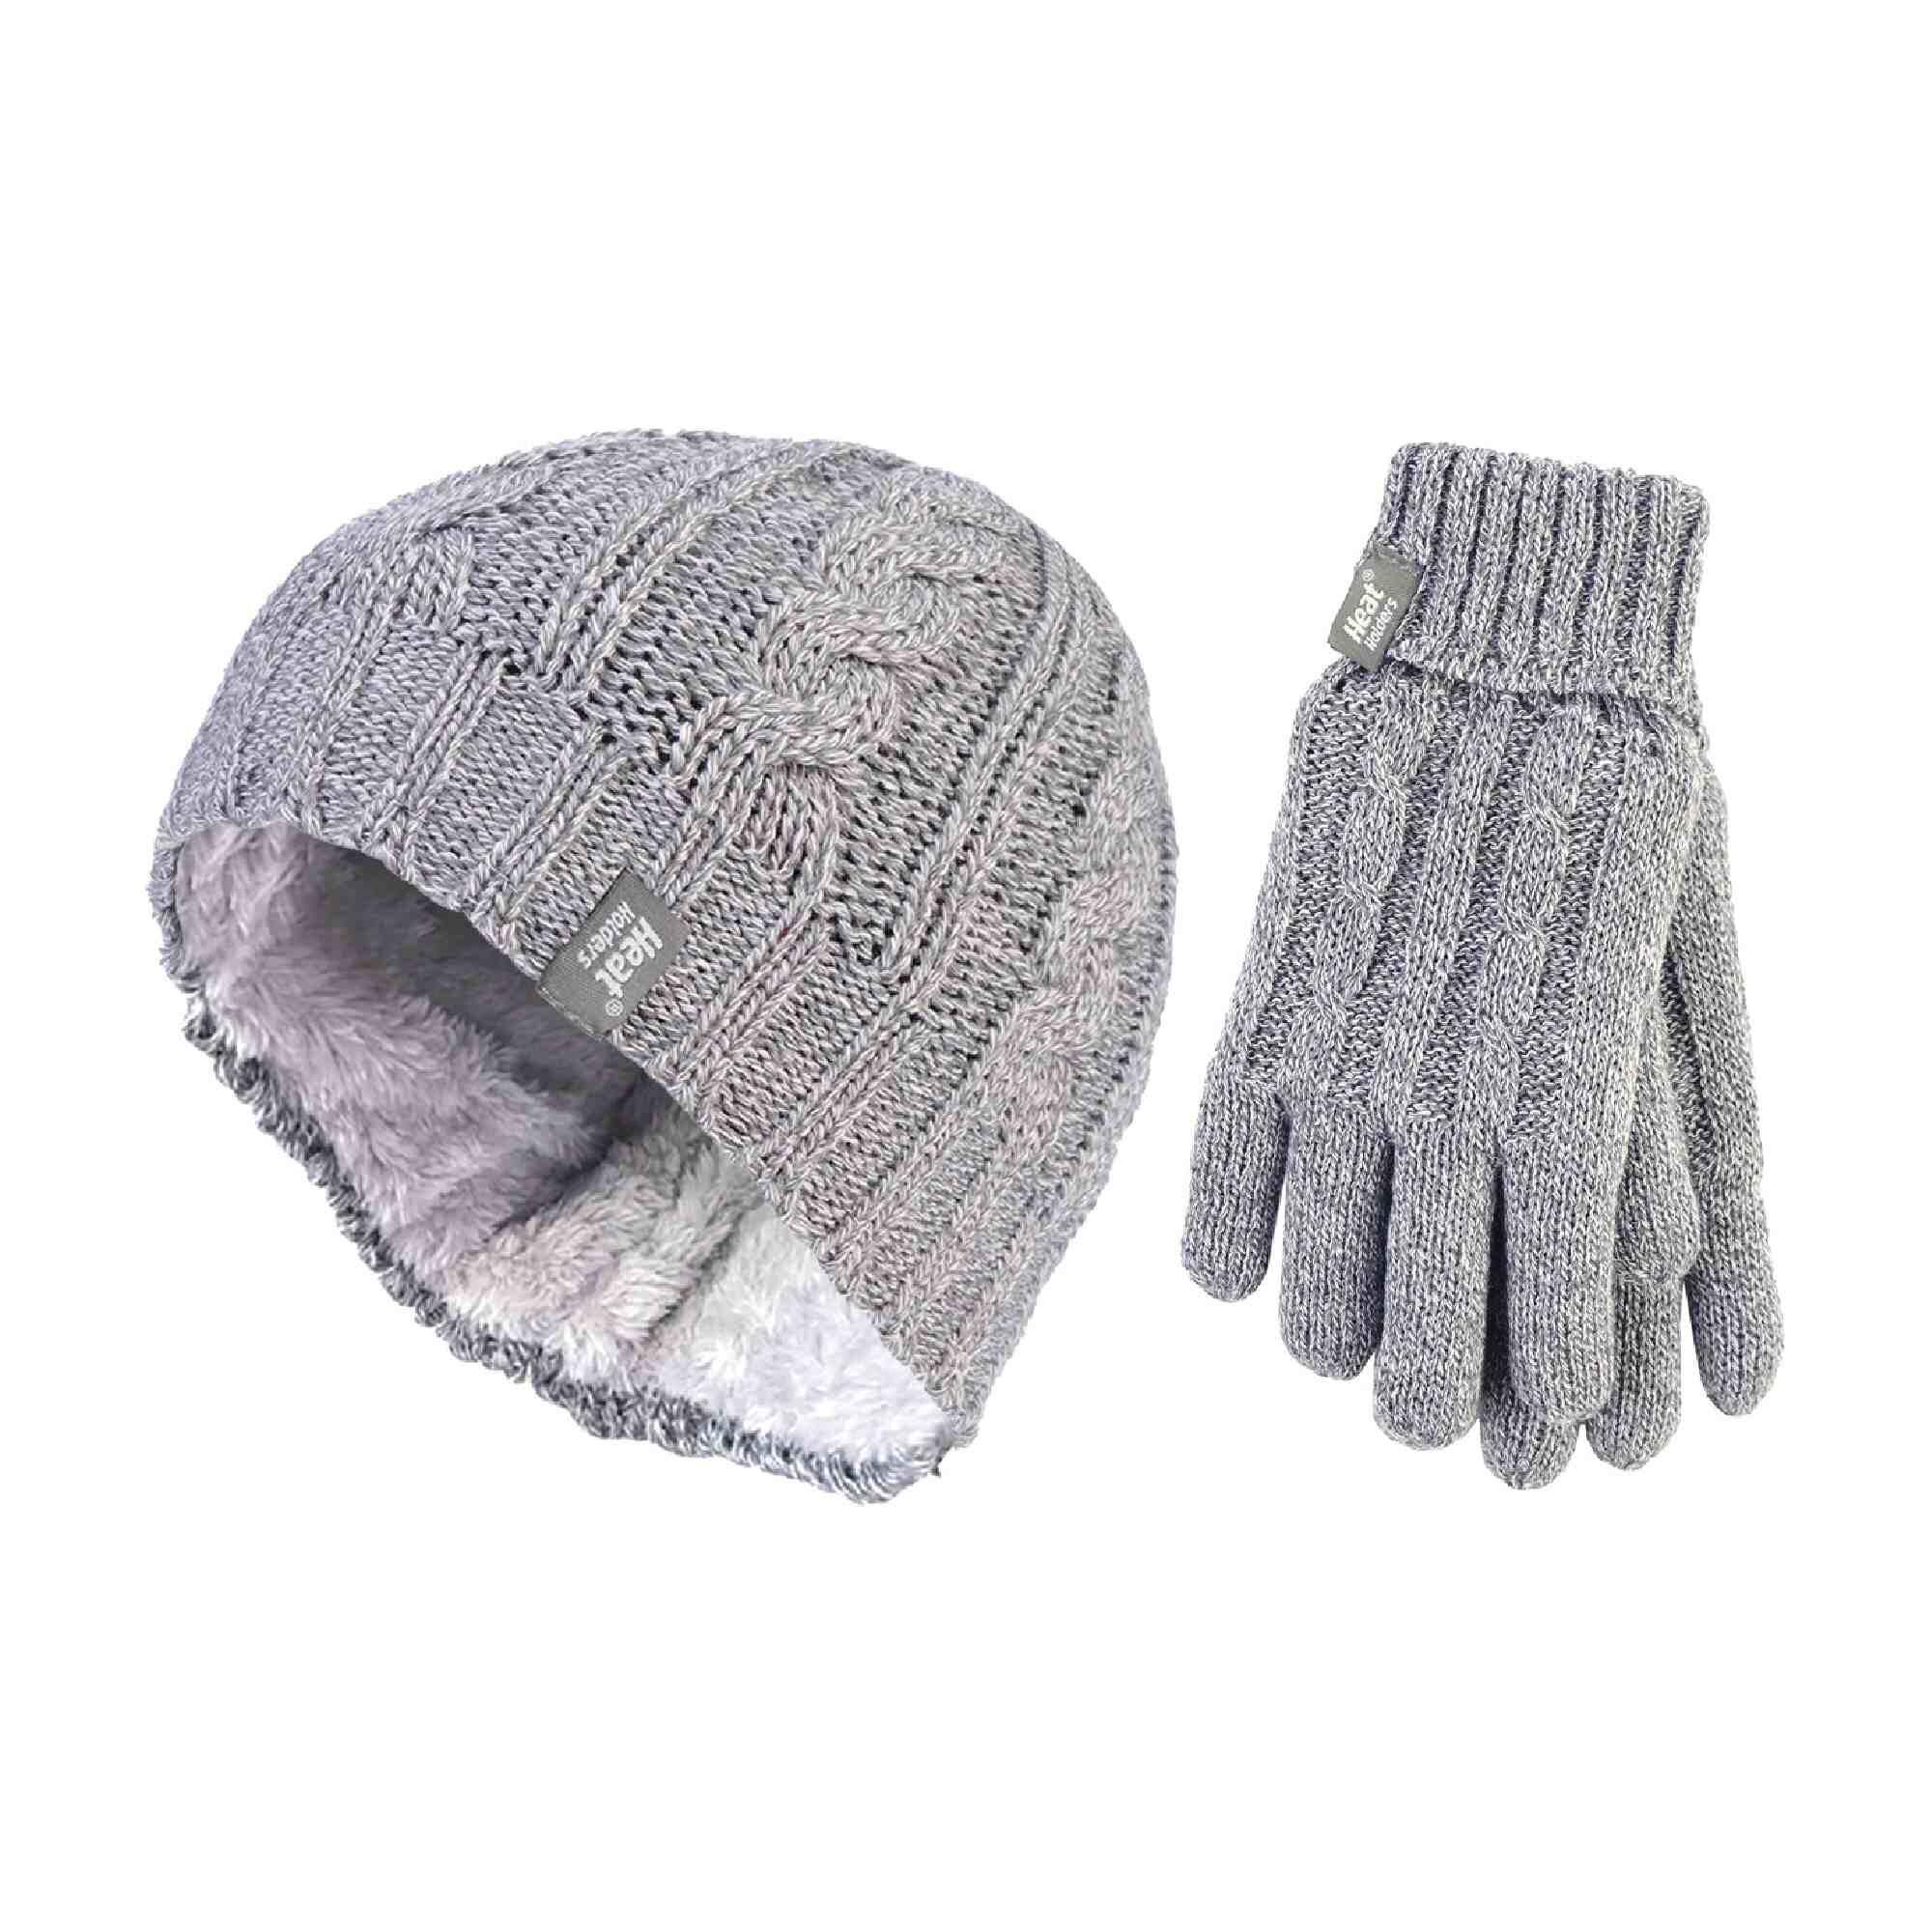 Ladies Fleece Lined Thermal Hat & Gloves Set for Winter 1/4